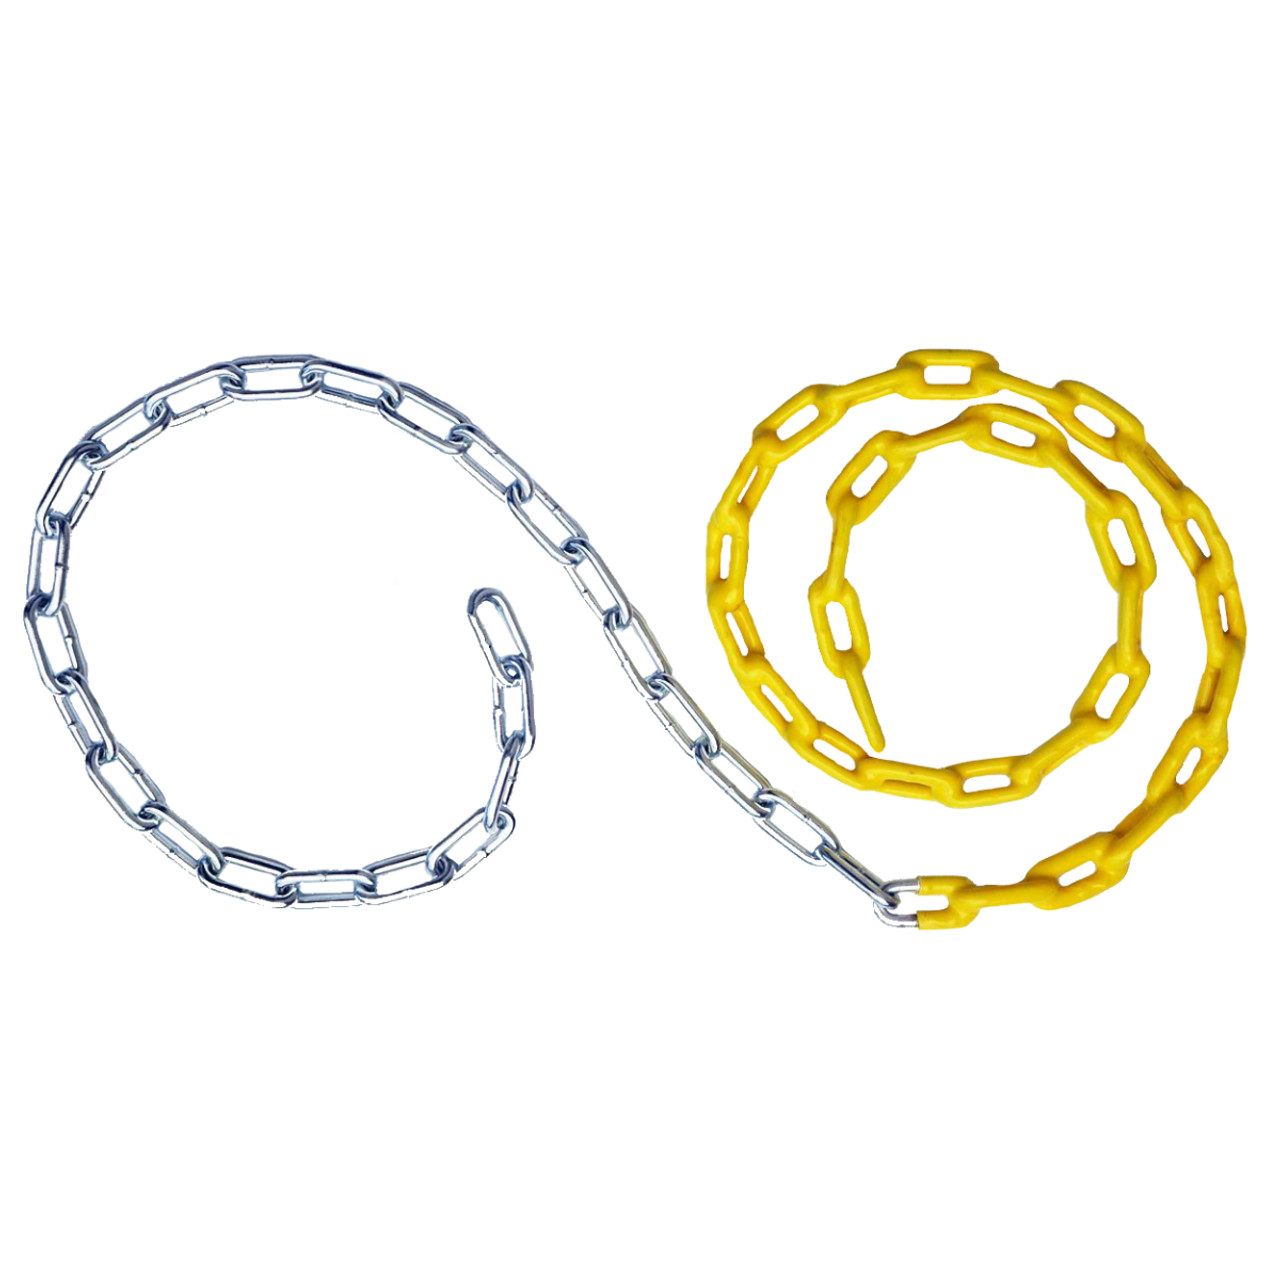 Heavy Duty Swing Chain with Plastisol Coating - PlaysetParts.com